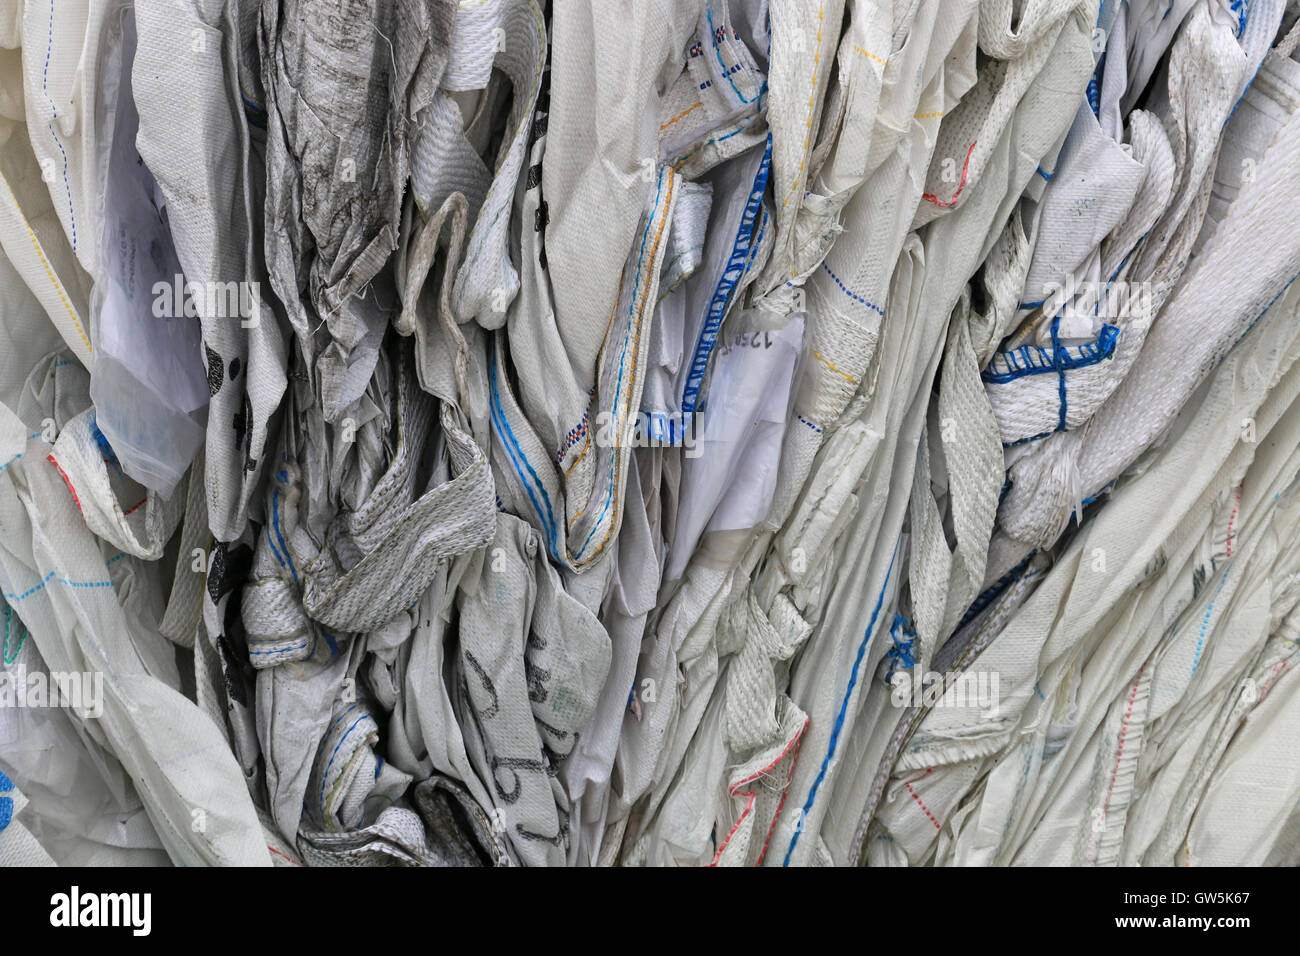 section of tightly folded empty storage bags Stock Photo